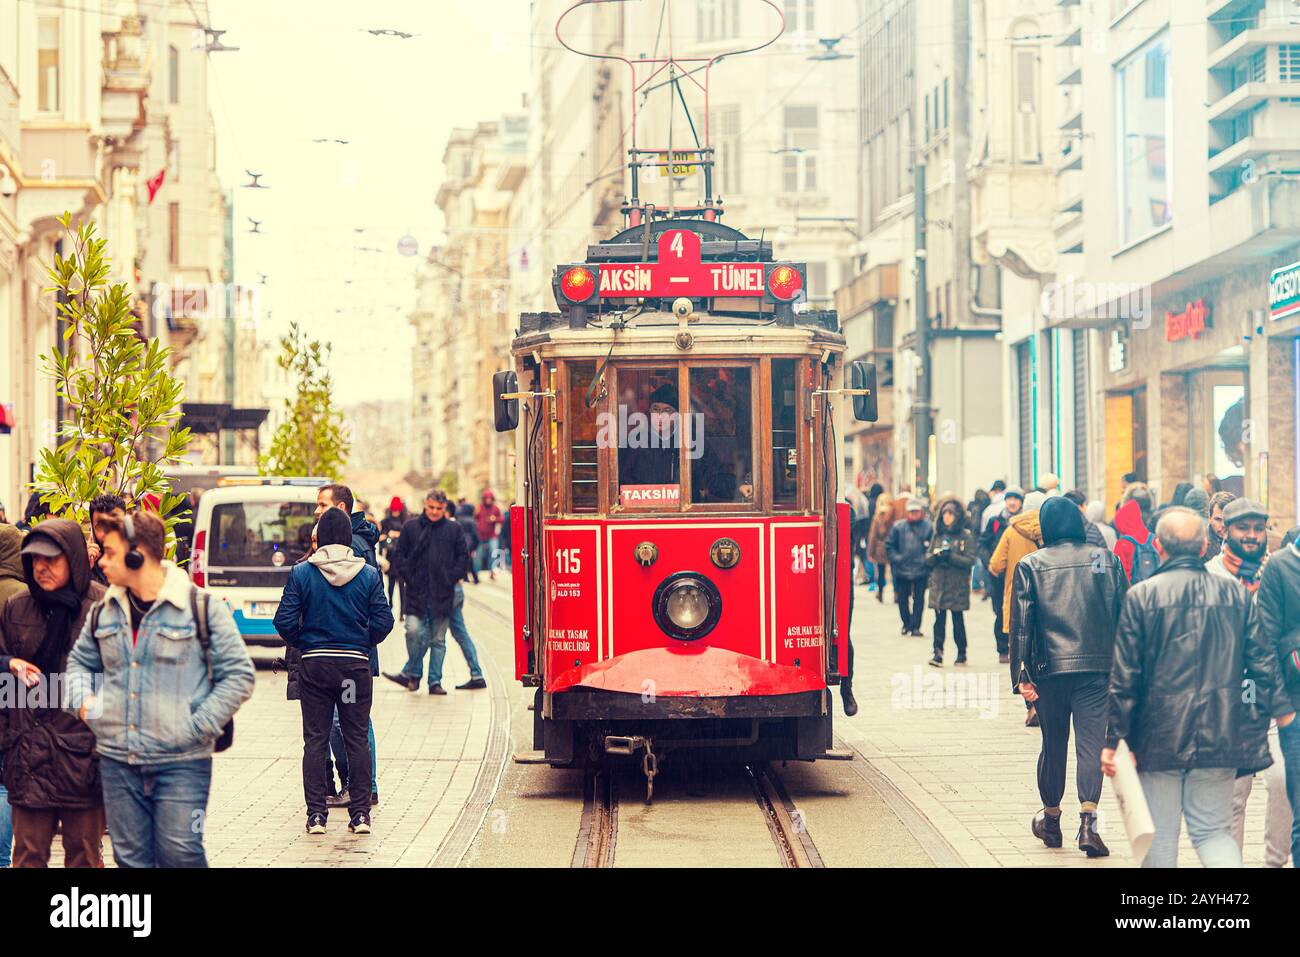 ISTANBUL - JAN 01: Famous retro red Tram on on Taksim Square and Istiklal Street in Istanbul on January 01. 2020 in Turkey Stock Photo